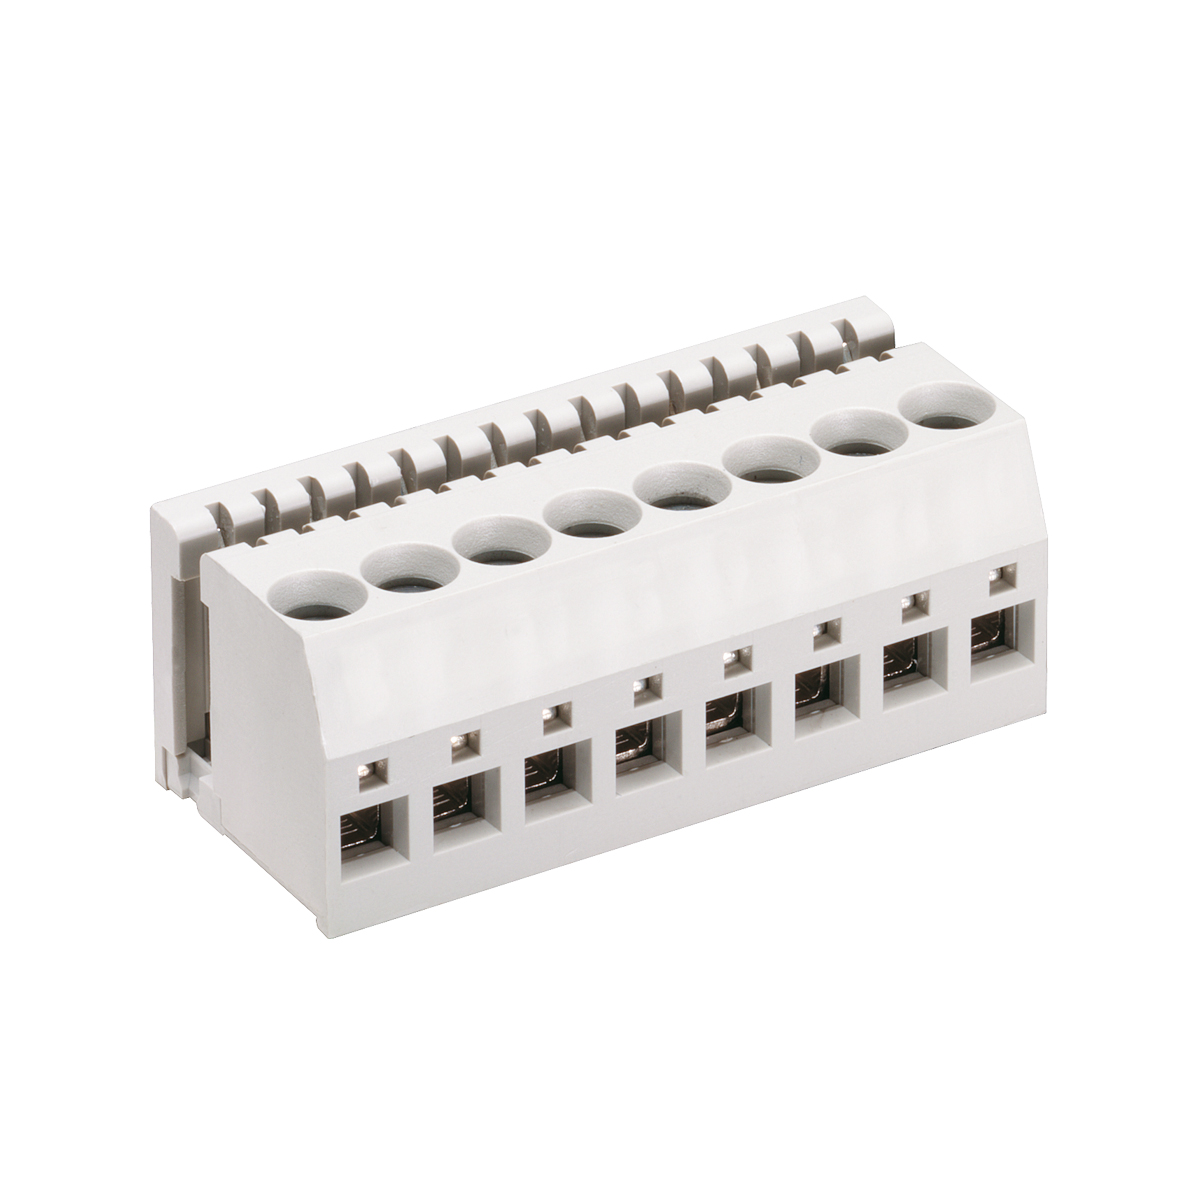 Lumberg: 5 RS (Series 52 | Direct connectors with screw clamps, for insert cards, pitch 5.0 mm)